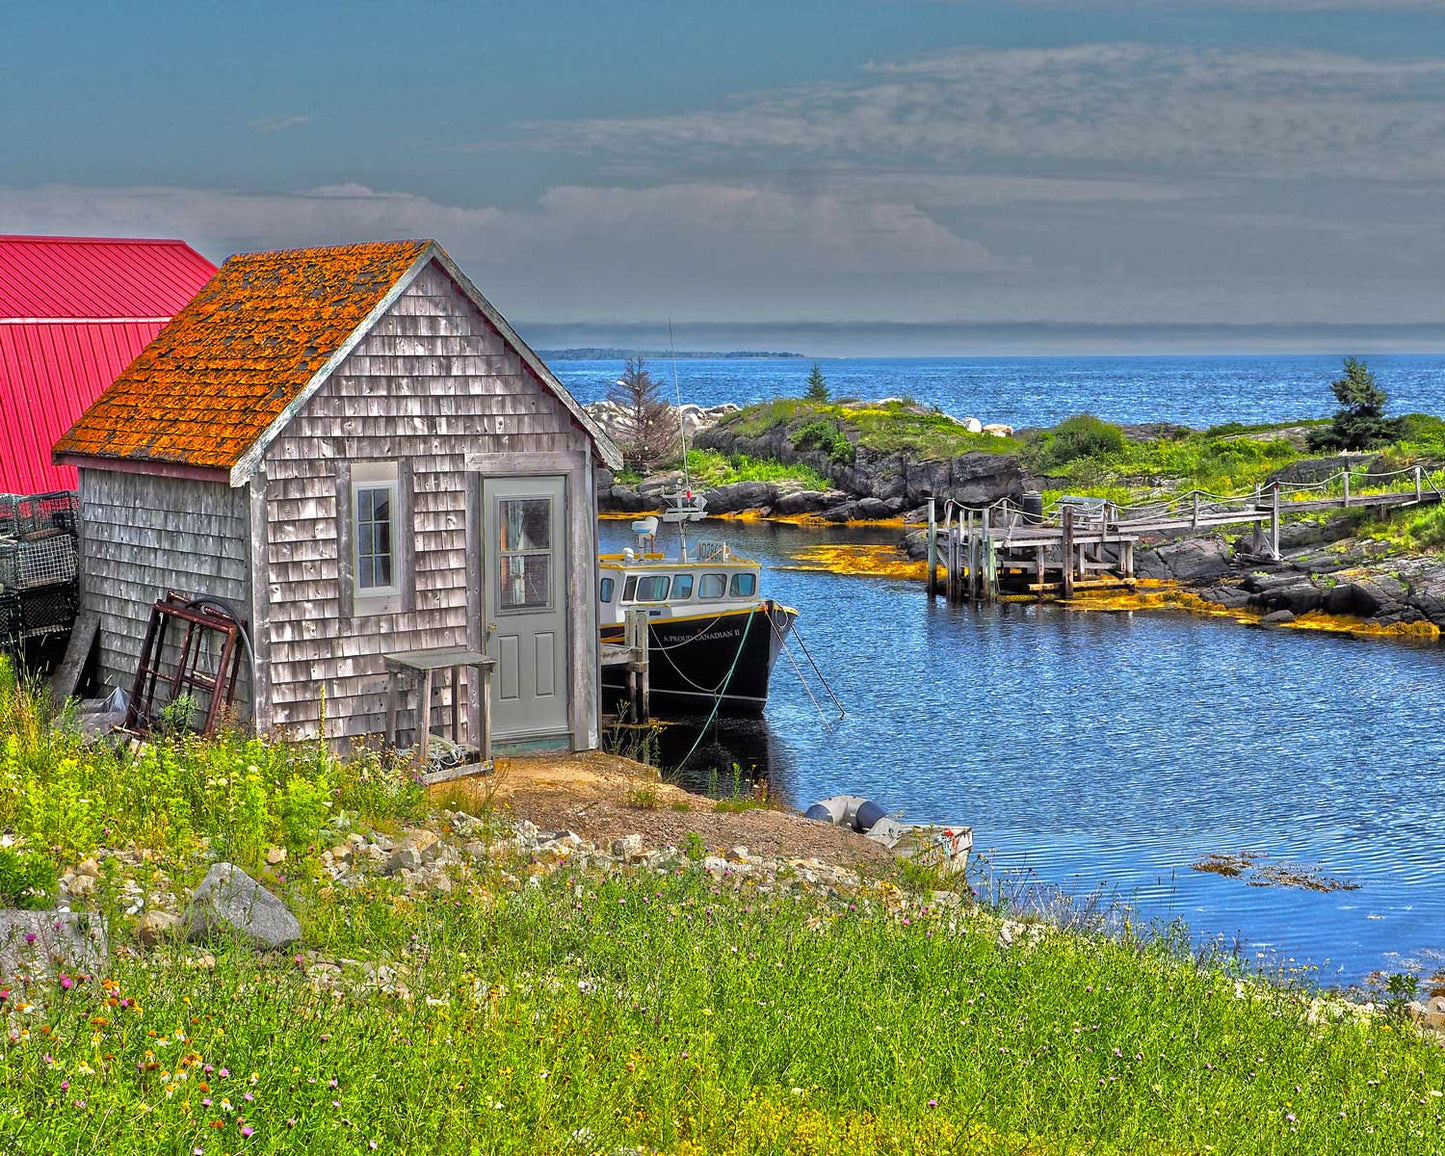 Spectacular view of Blue Rocks harbour featuring a picturesque shingle cabin. Photography 8 x 10 inches covered with resin. Ready-to-hang in your favorite room.